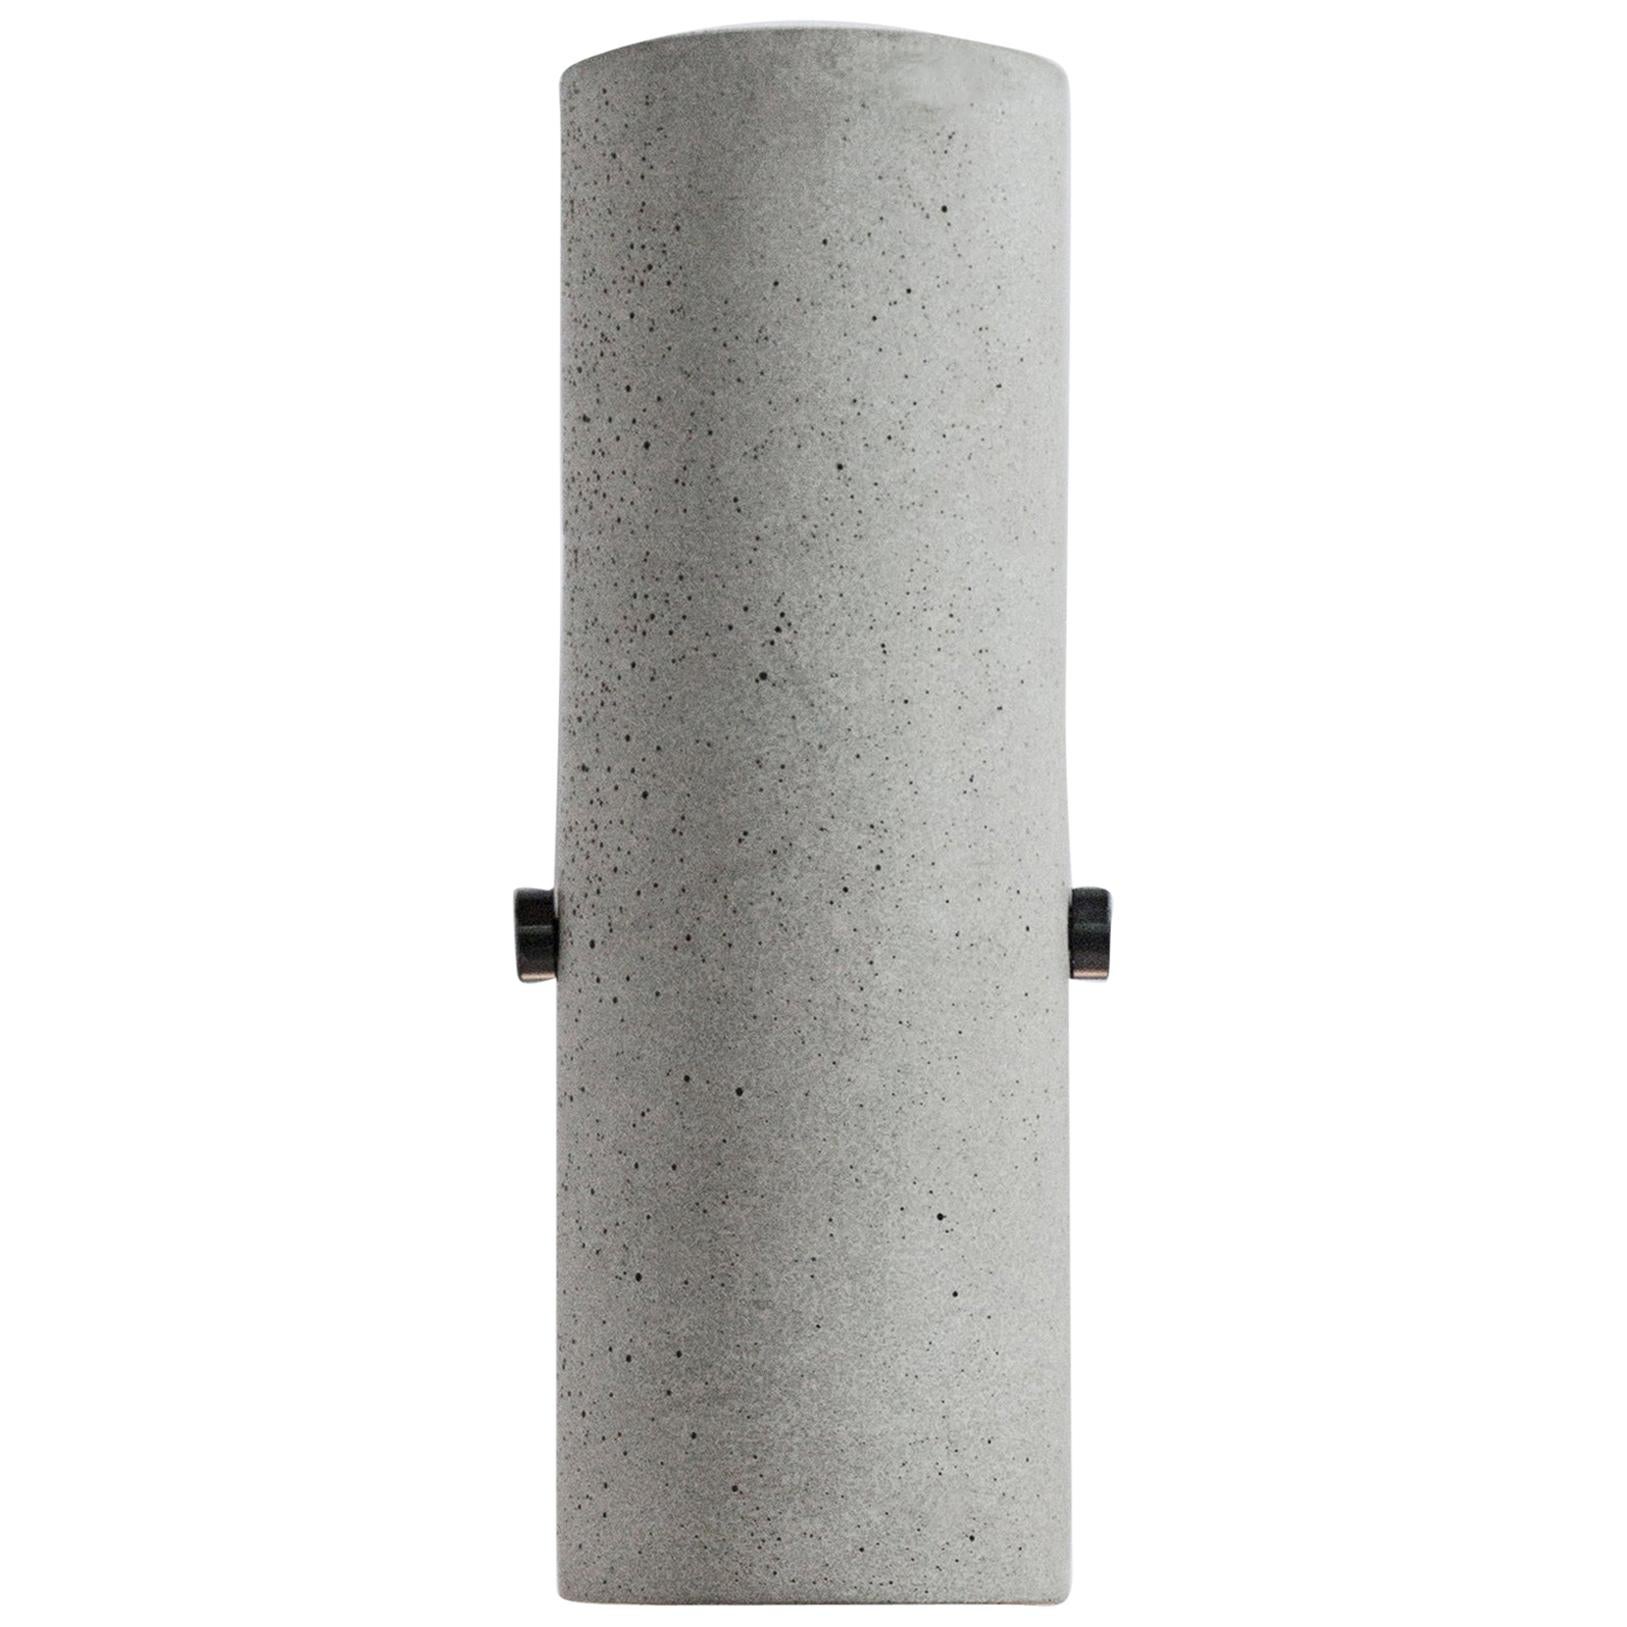 Concrete and Aluminum Wall Lamp, “Lv, ” from Concrete Collection by Bentu